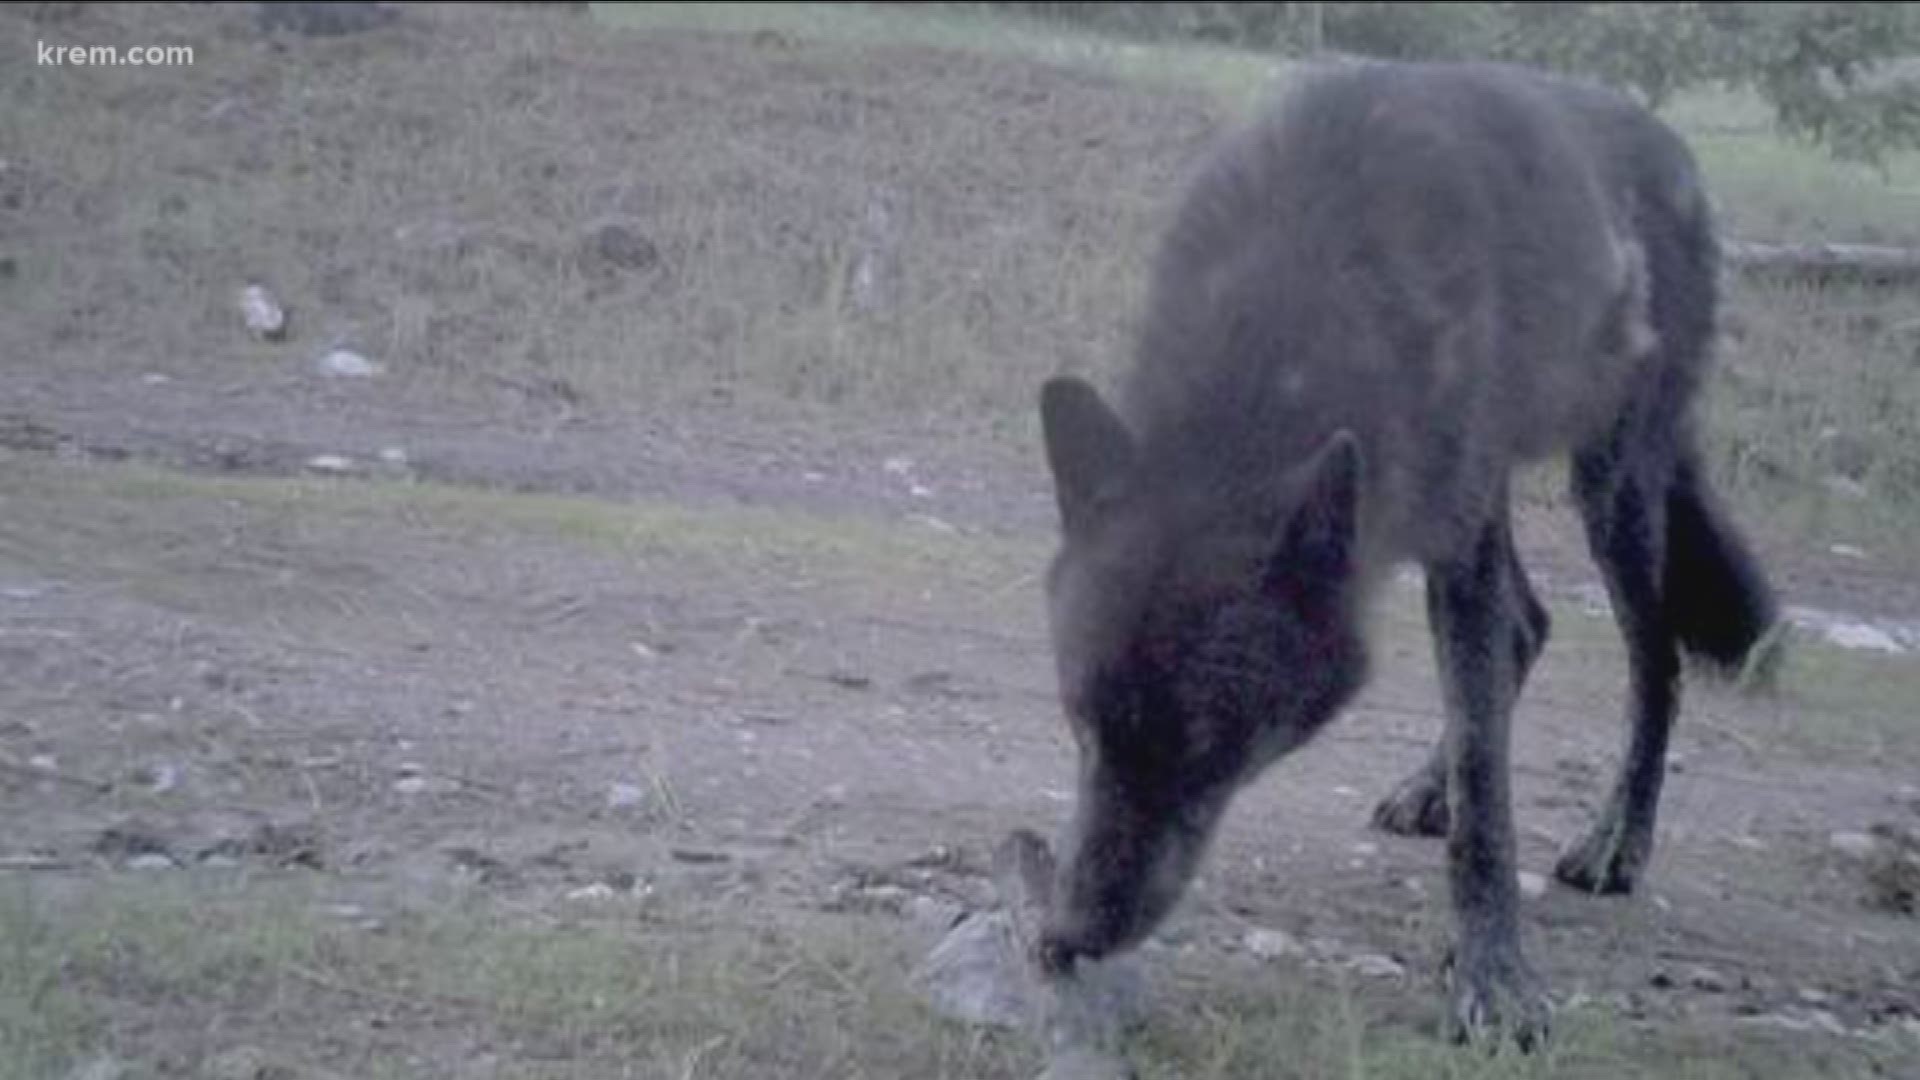 The Togo wolf pack has killed several livestock animals in eastern Washington.